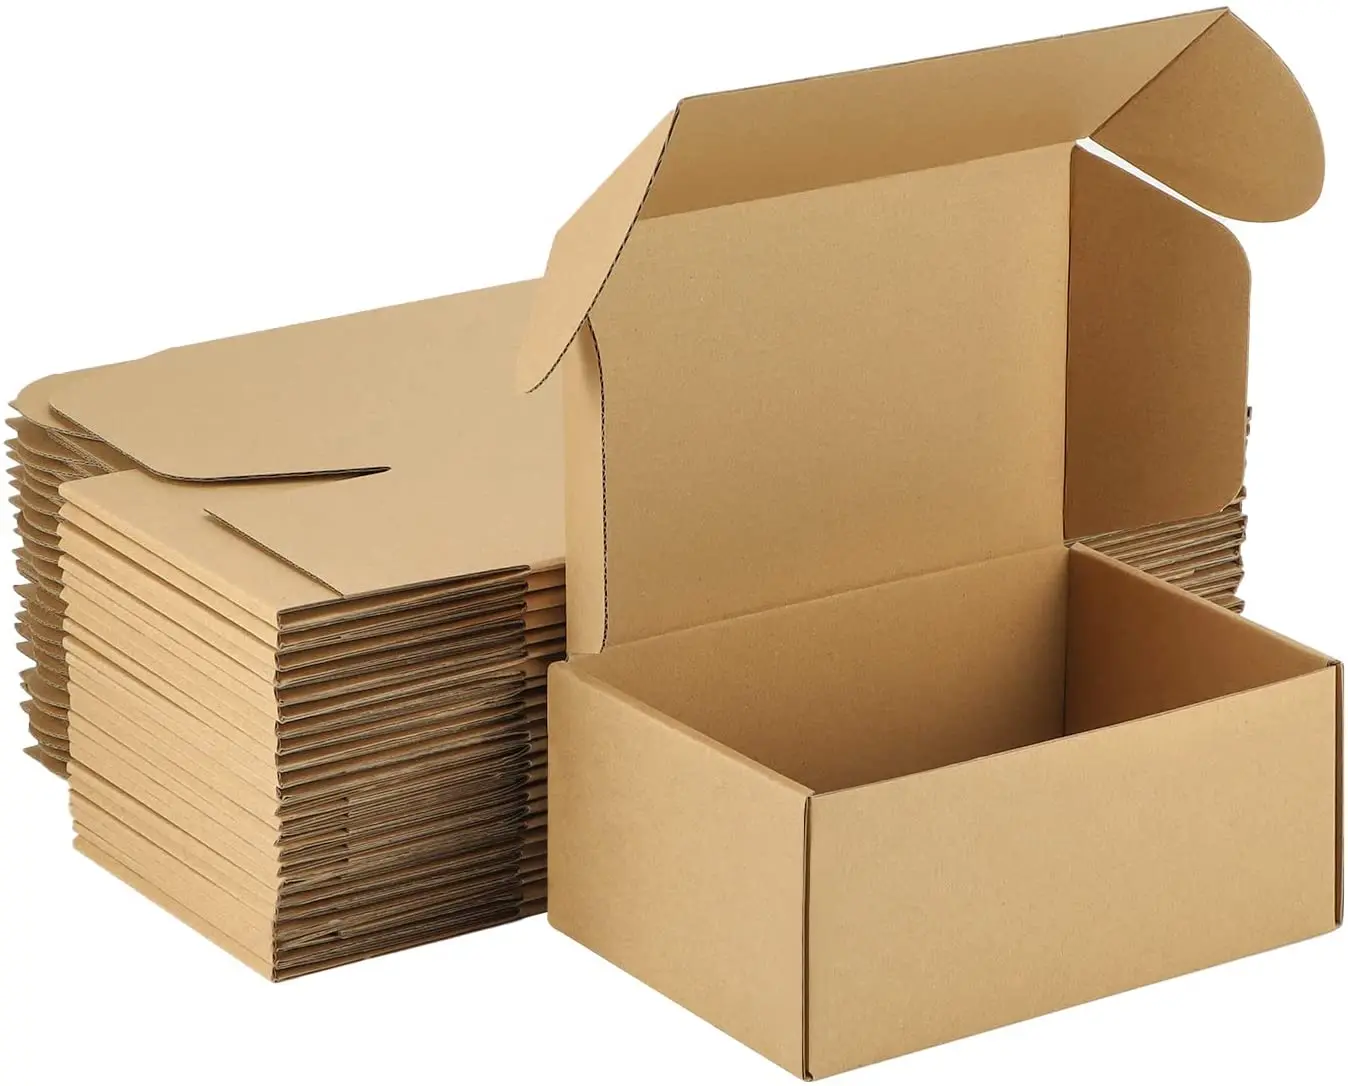 9x6x4 Shipping Boxes White Cardboard Mailing Boxes Single Wall Corrugated Box 25 Pack 